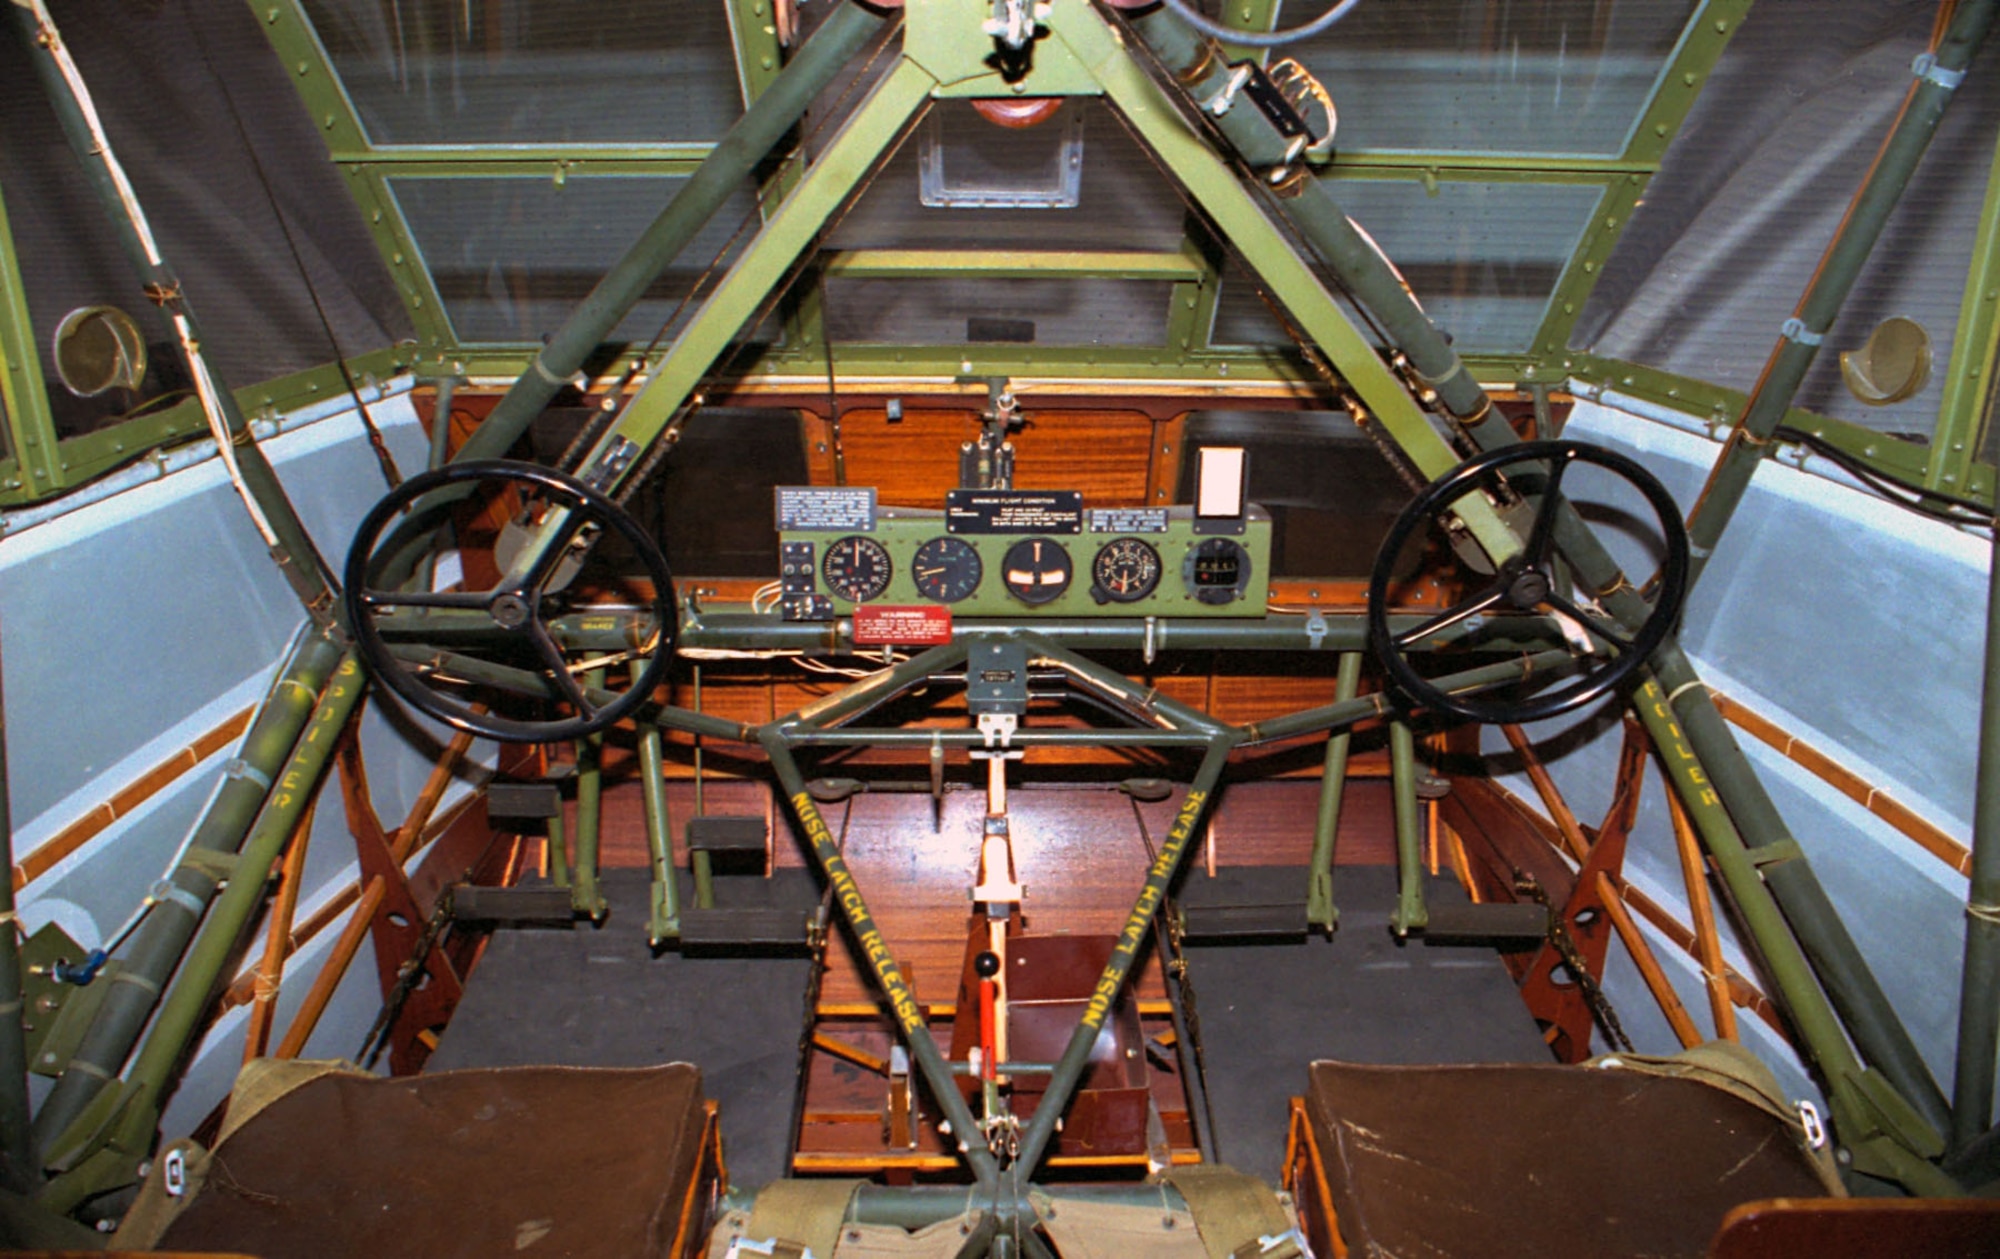 DAYTON, Ohio -- Waco CG-4A cockpit at the National Museum of the United States Air Force. (U.S. Air Force photo)